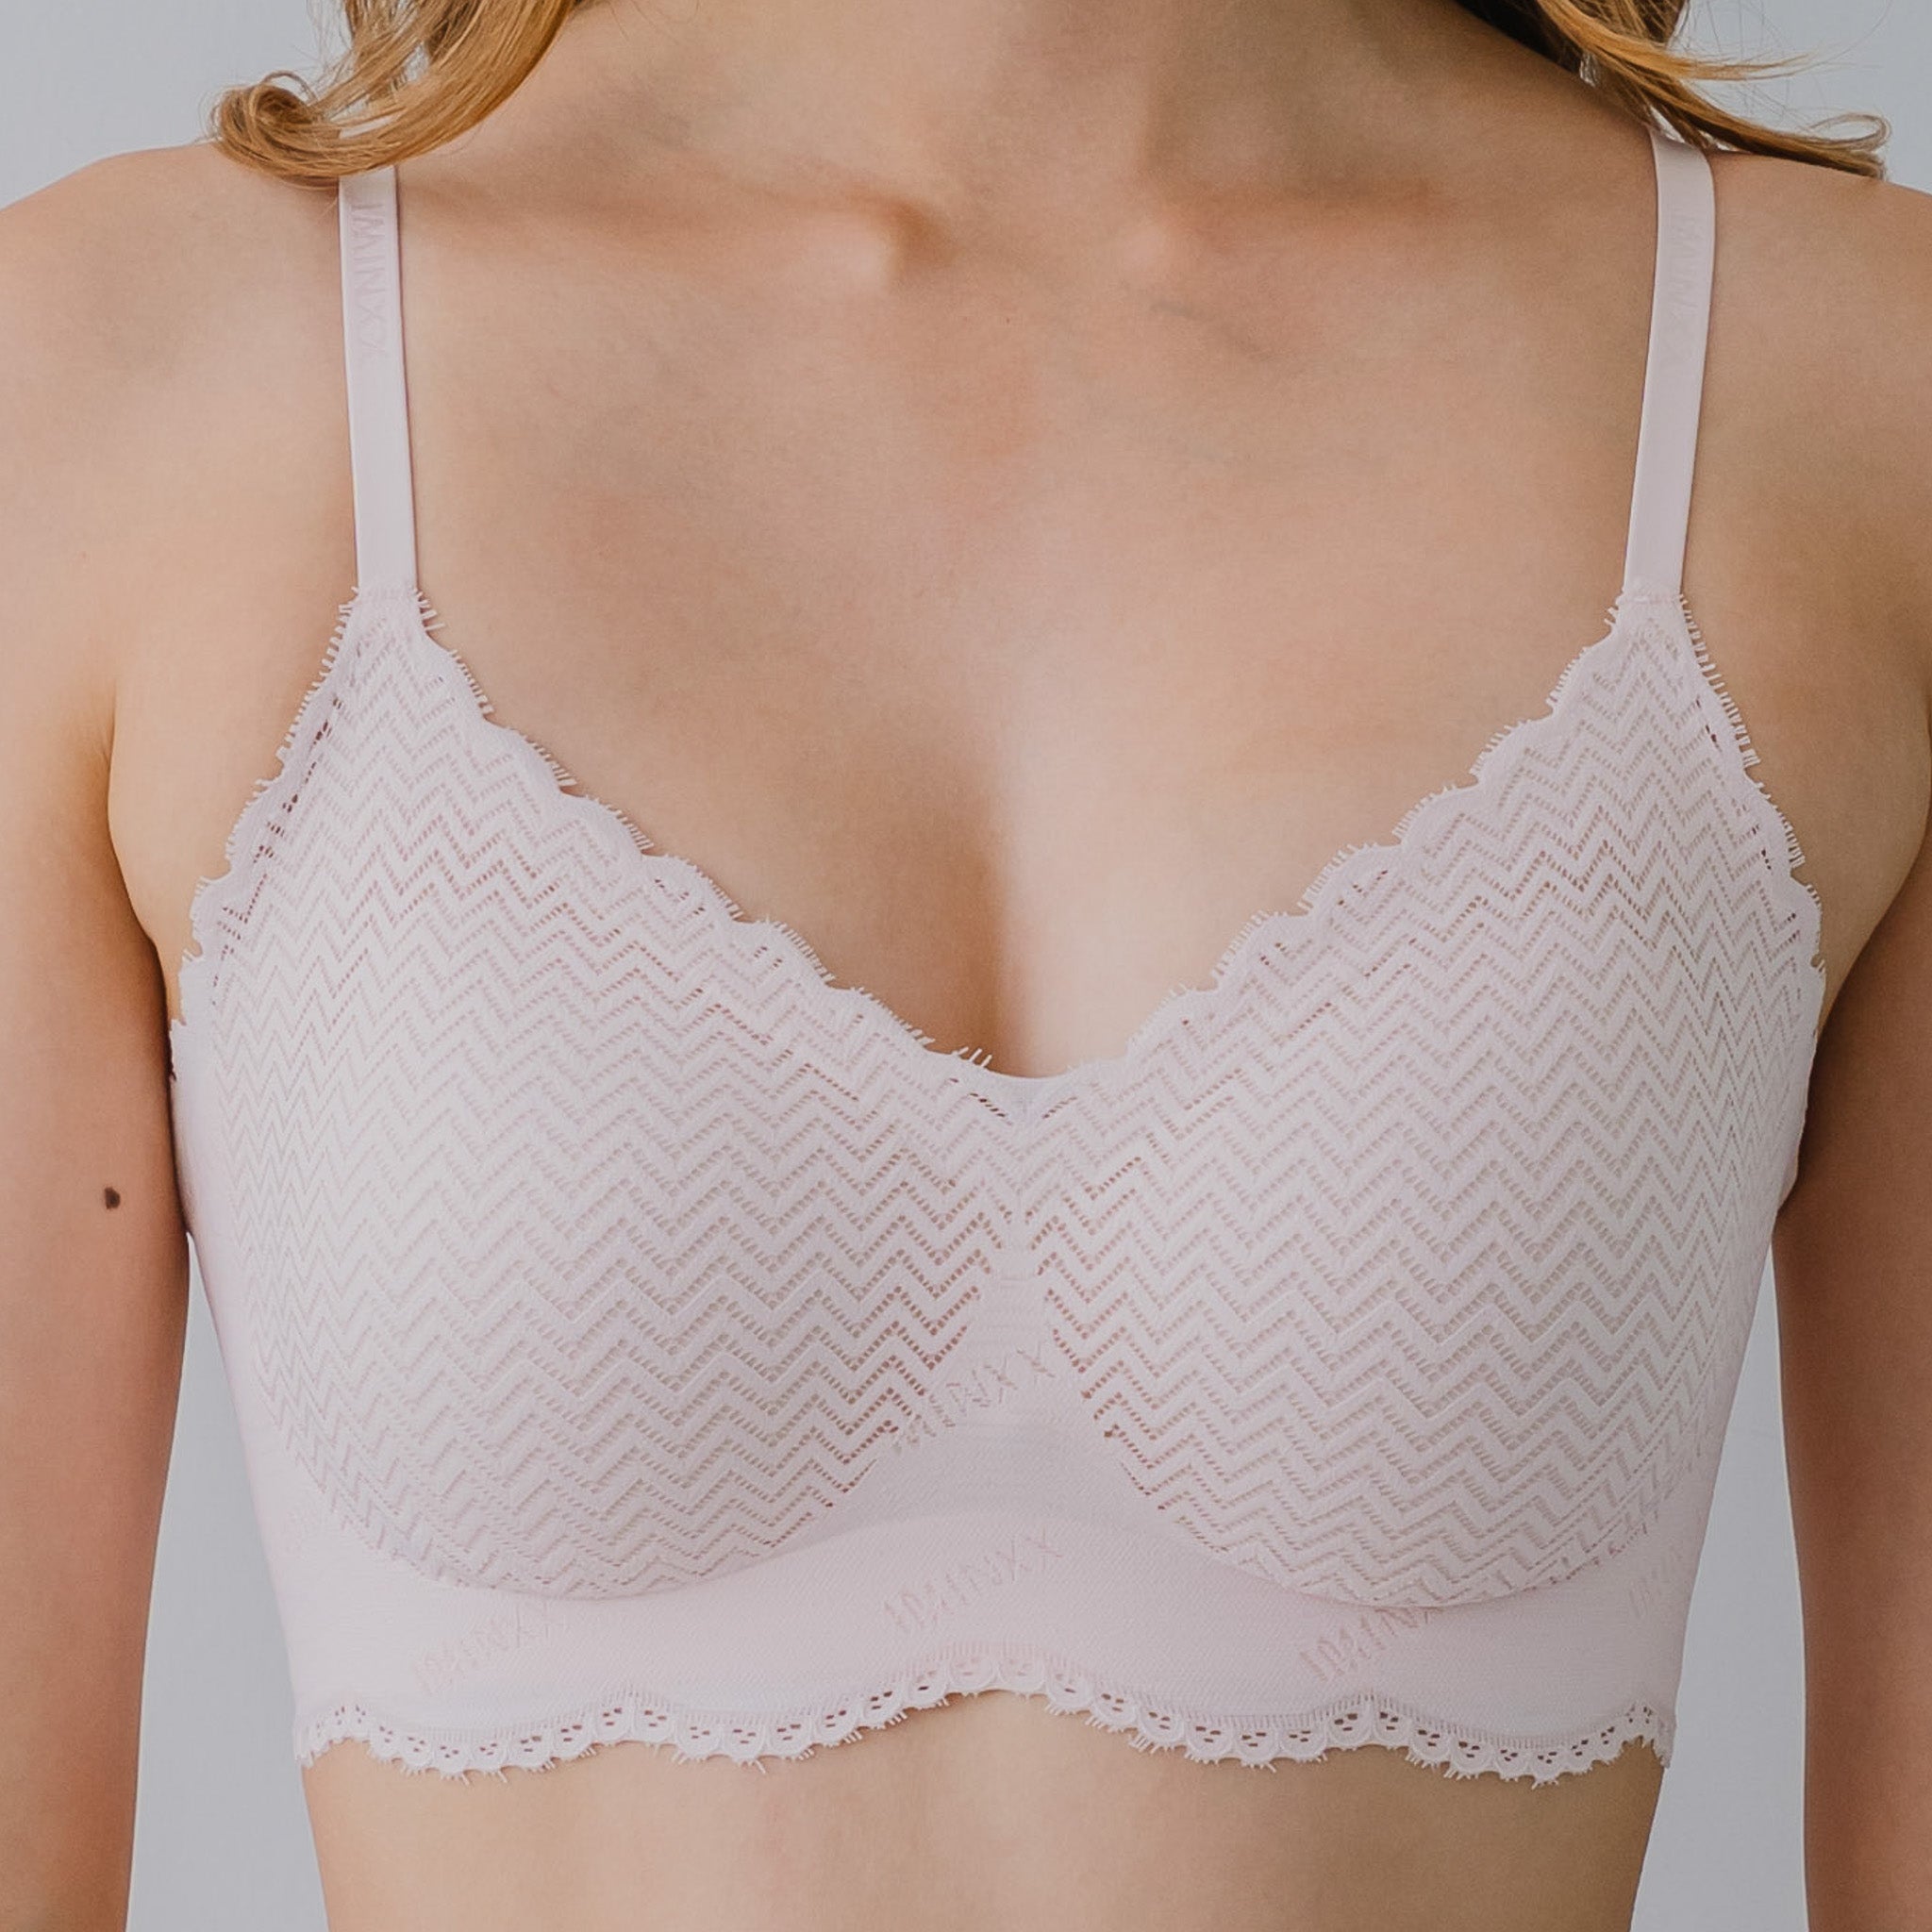 Seamless Bra with Lace Overlay, Bras